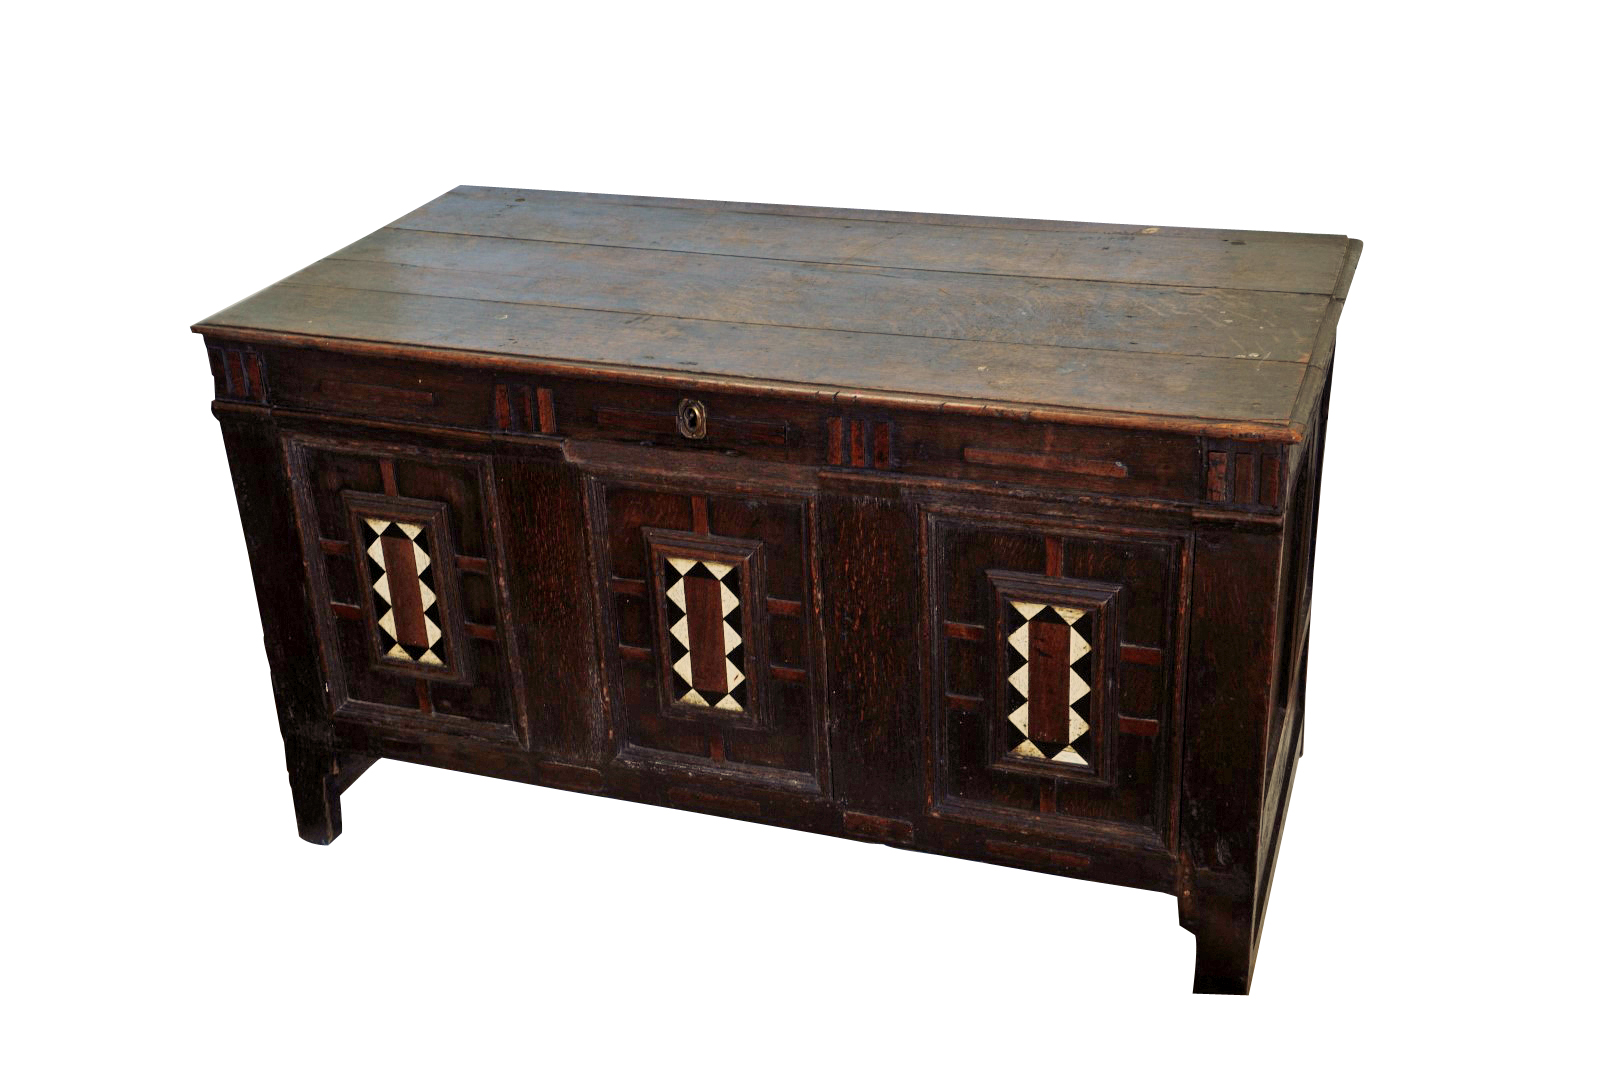 A 19th century oak chest, the hinged lid formed from three planks and opening to reveal an